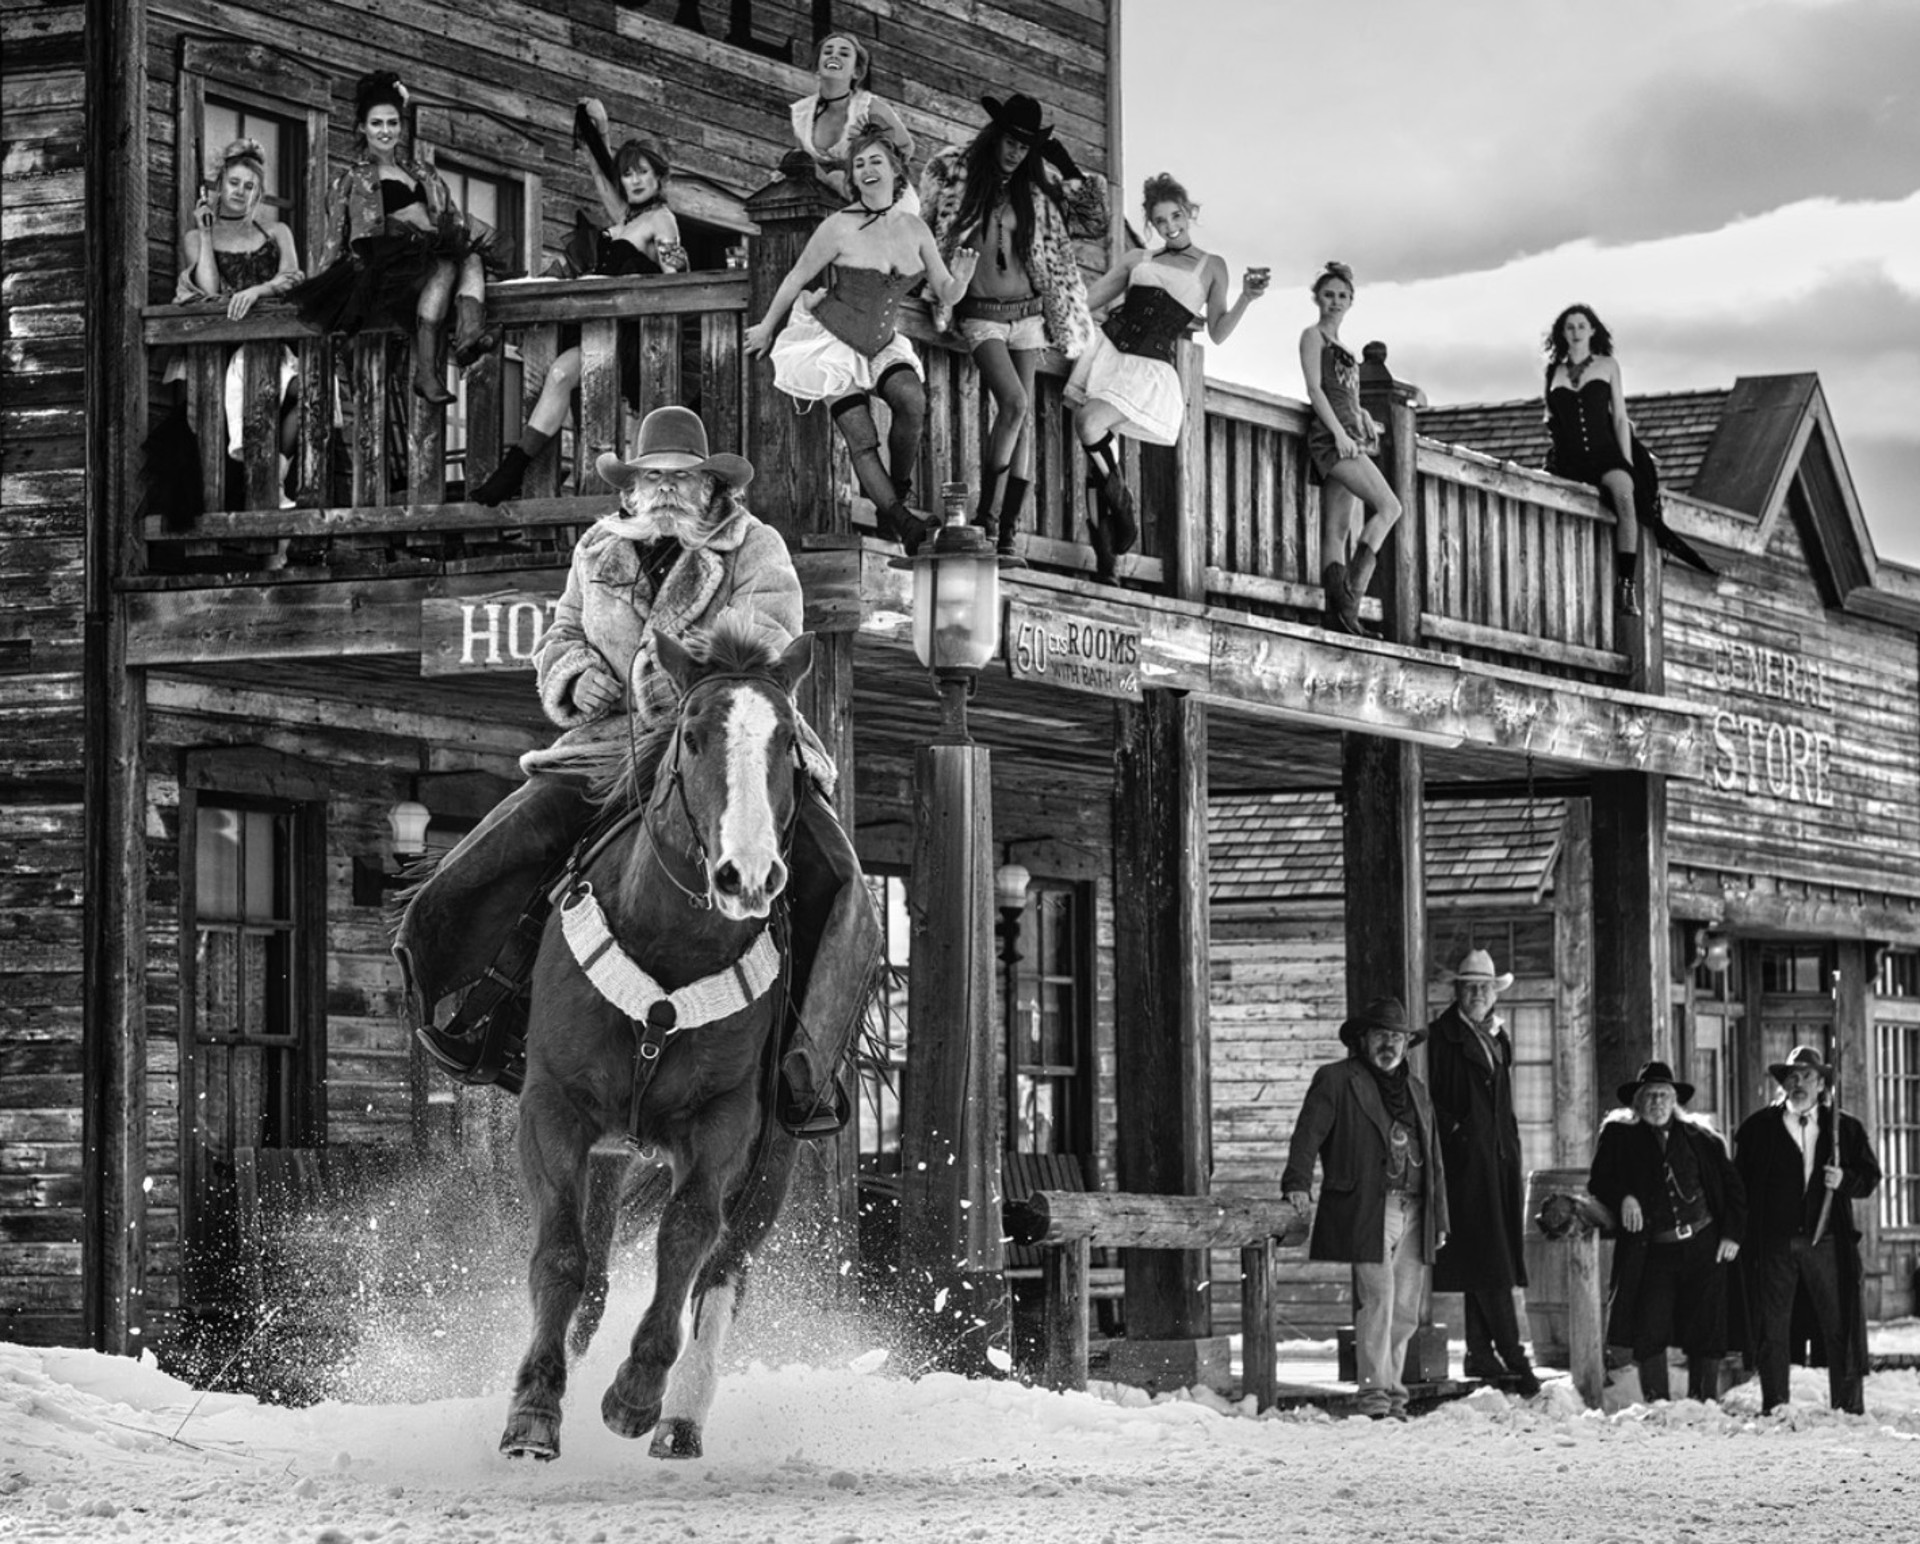 Mamas Don't Let Your Children Grow Up To Become Cowboys by David Yarrow